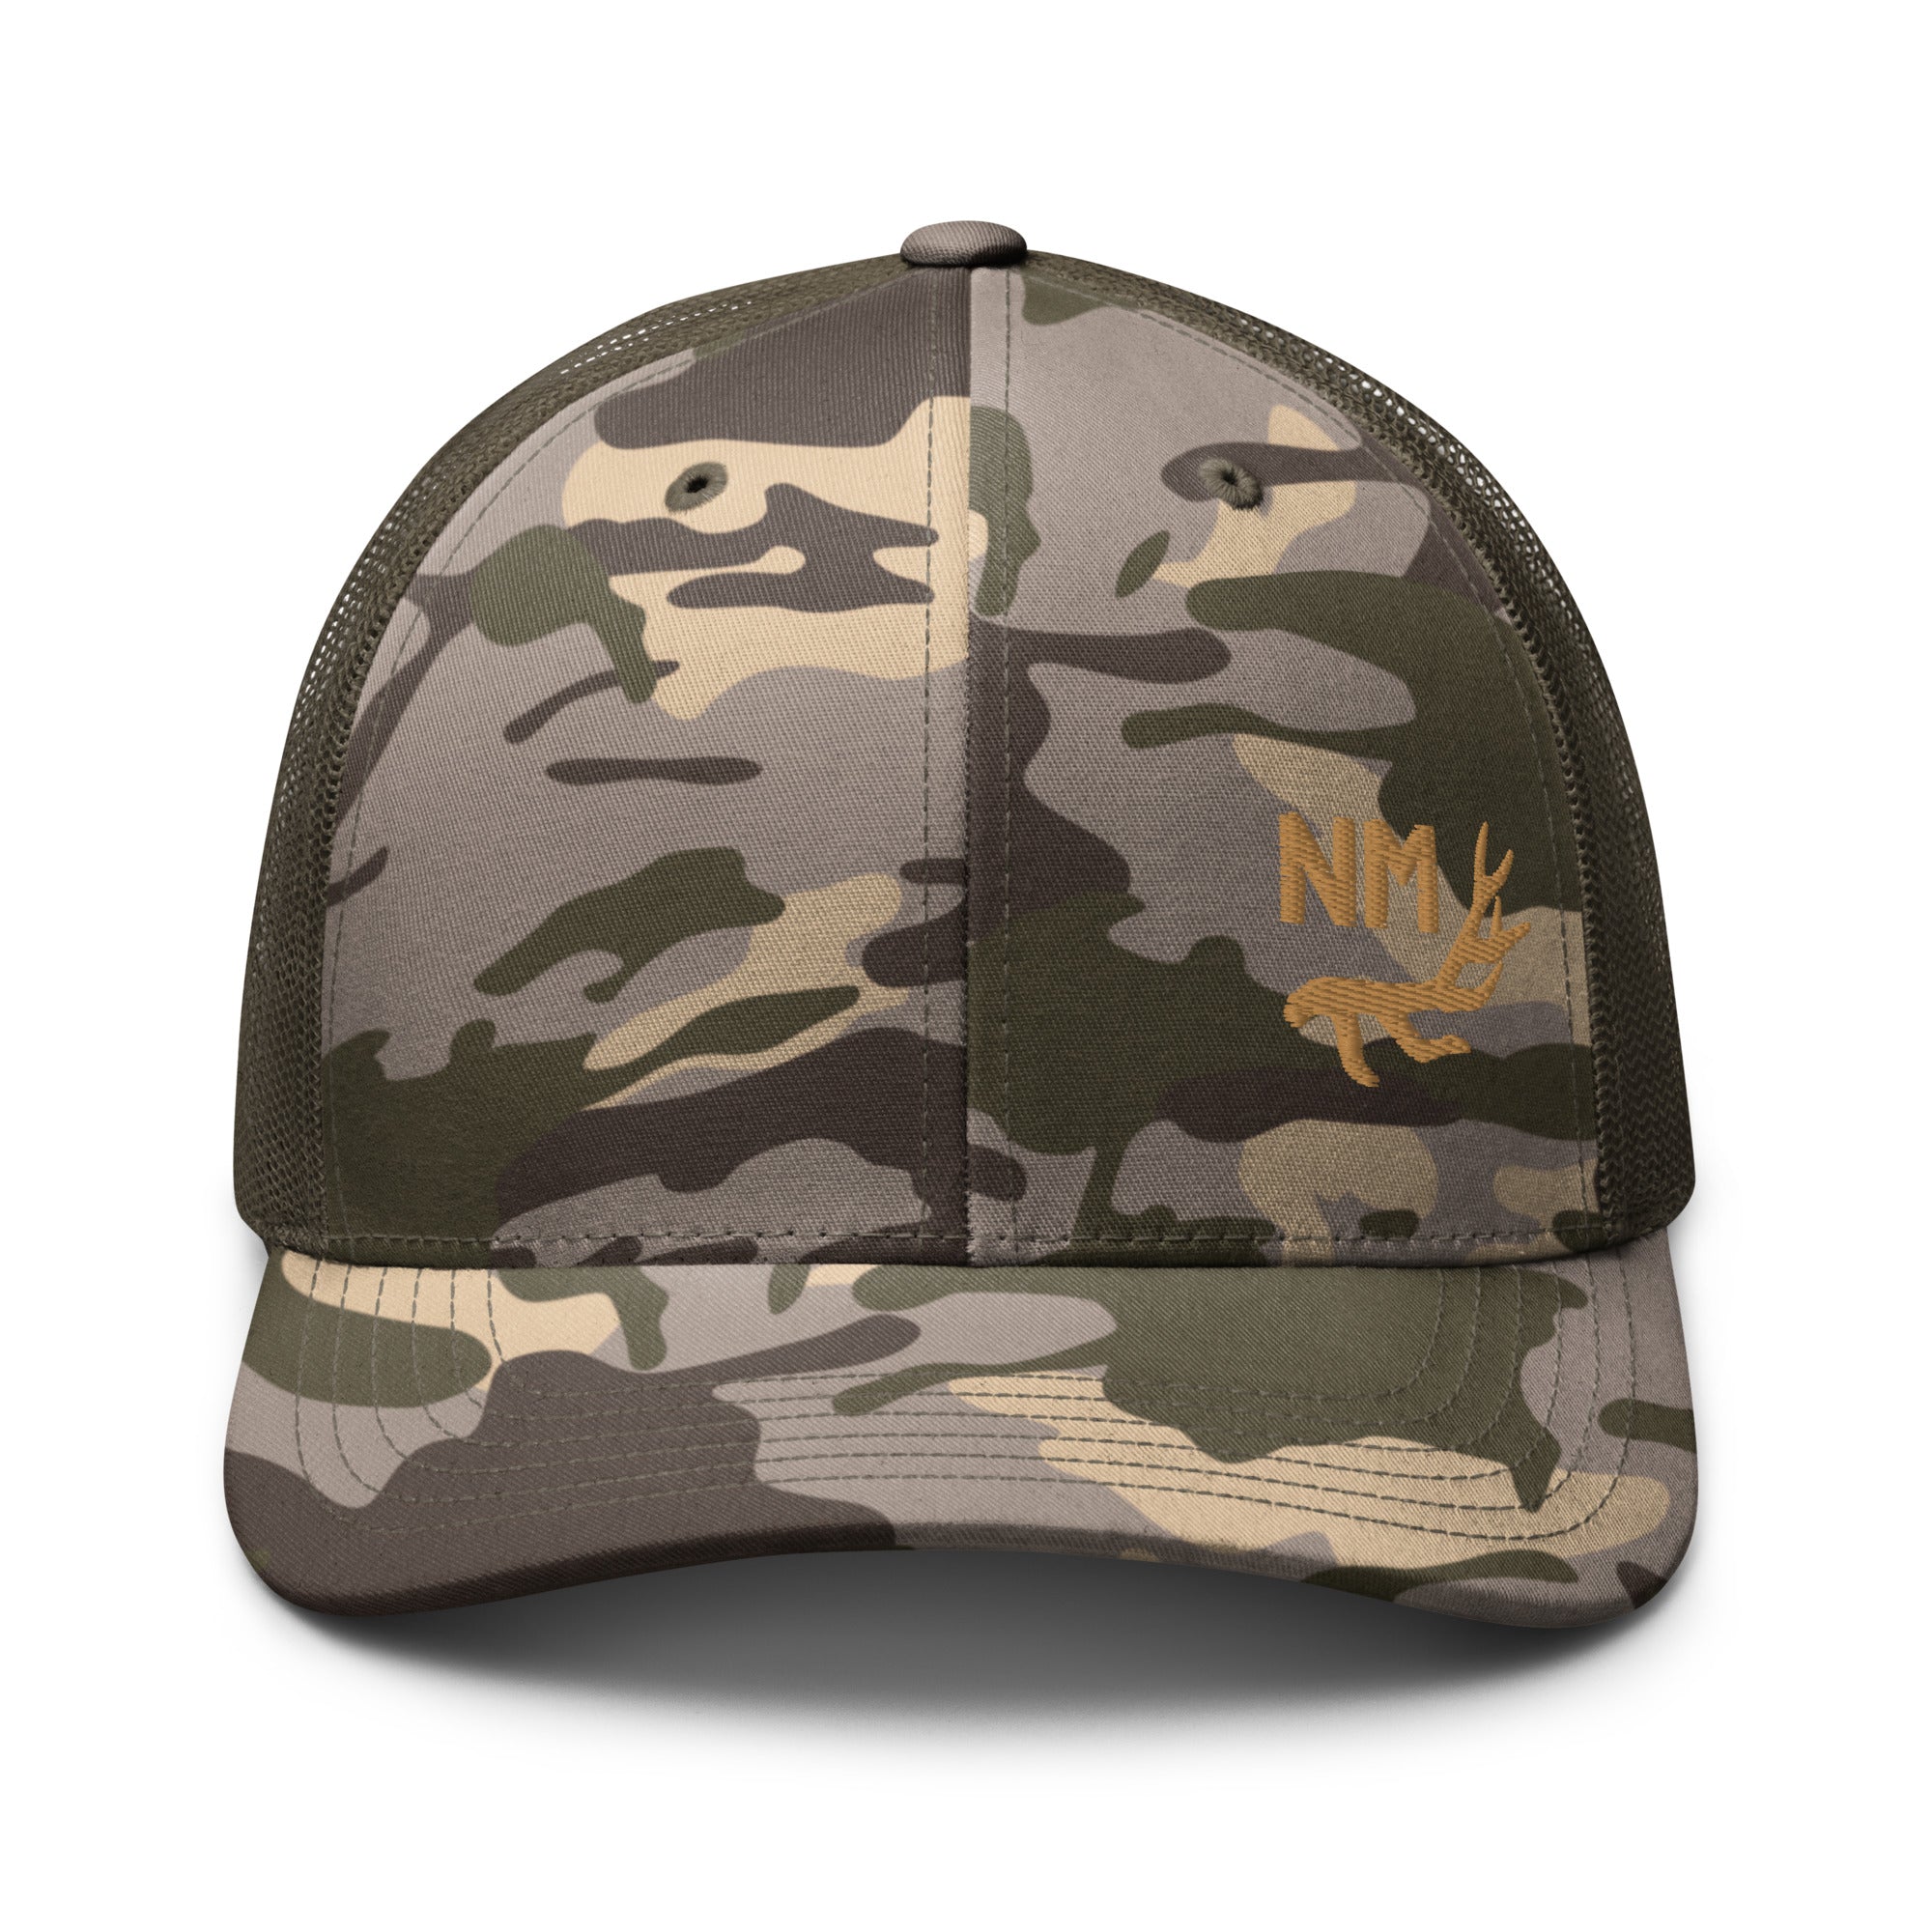 camouflage-trucker-hat-camo-olive-front-655e620053f74.jpg